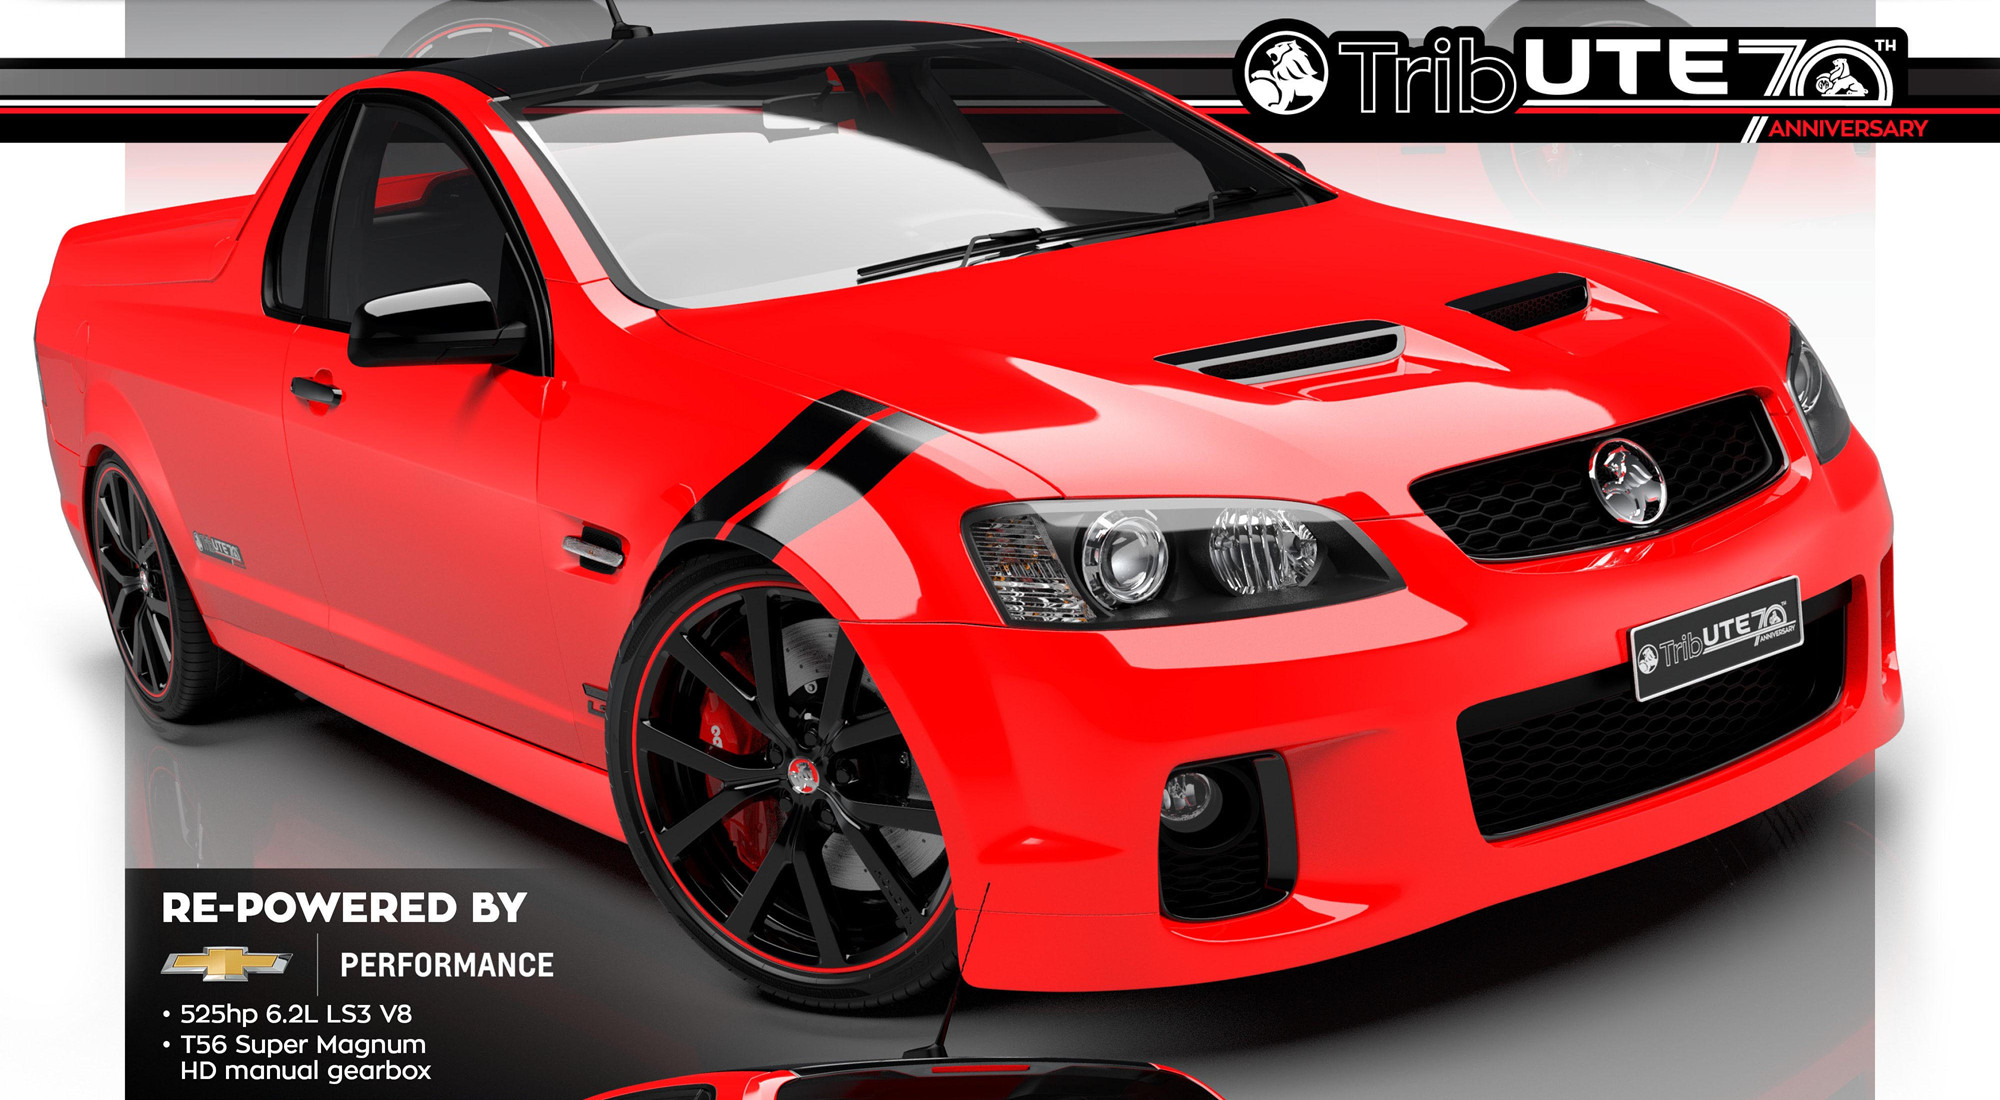 Holden Unveils TribUTE - A Salute To The Ute